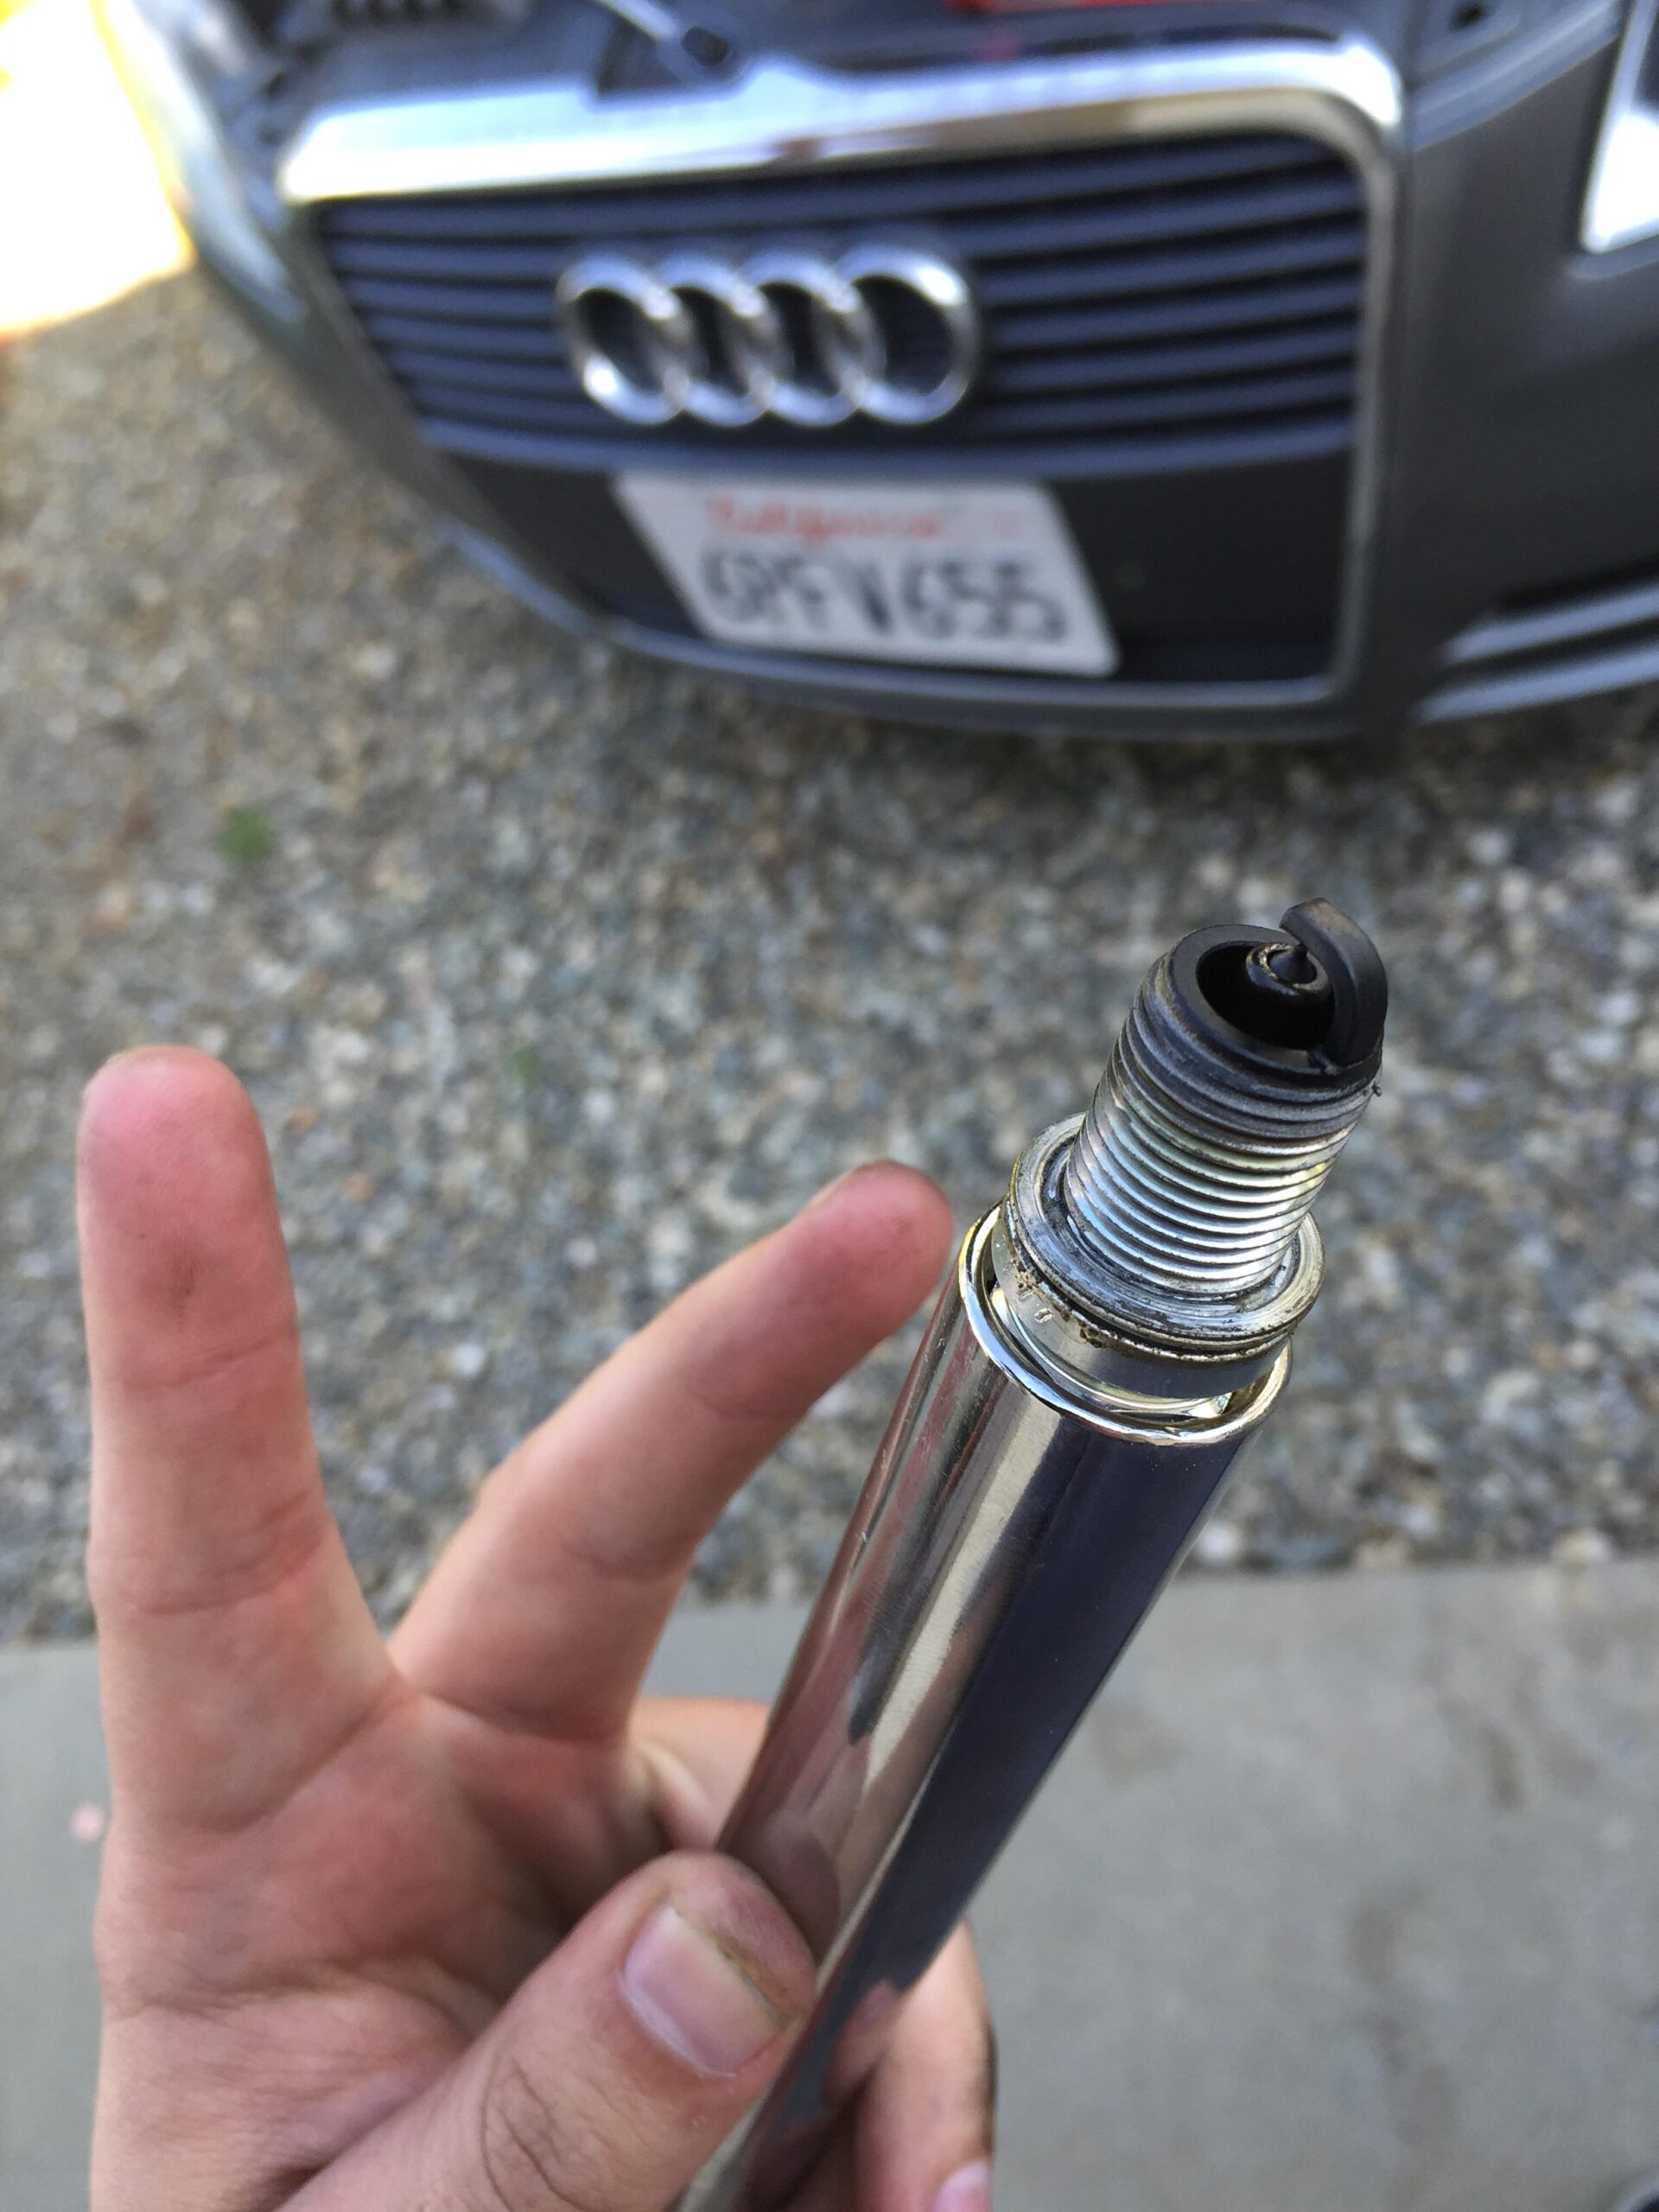 [SOLVED] Why Does My Spark Plug Smells Like Gas? WHY??